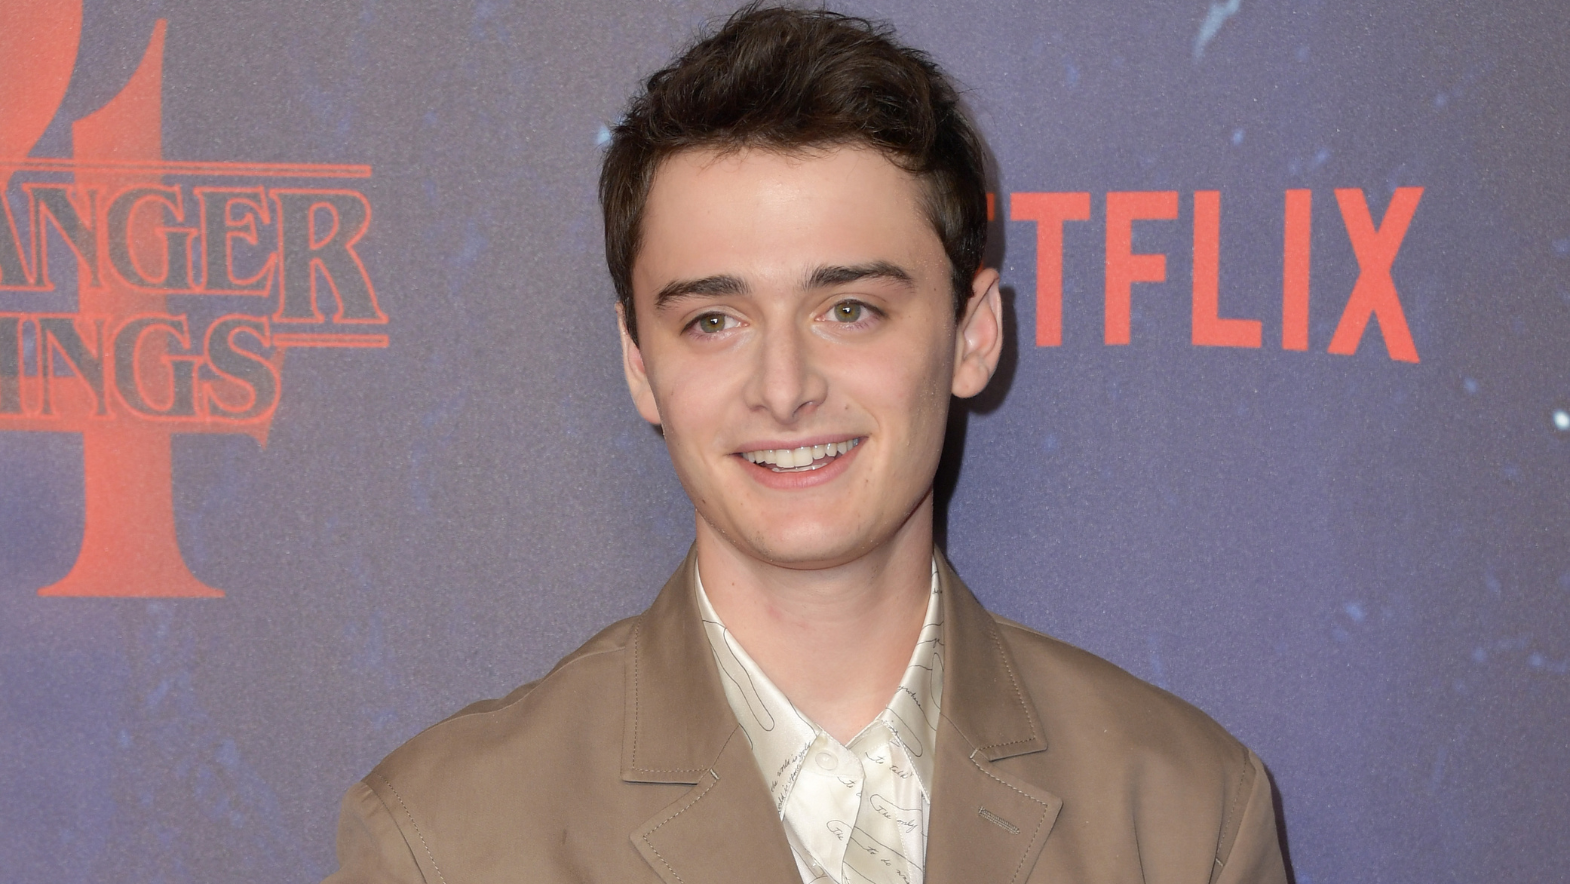 ‘Stranger Things’ Actor Noah Schnapp Comes Out as Gay | Inquirer